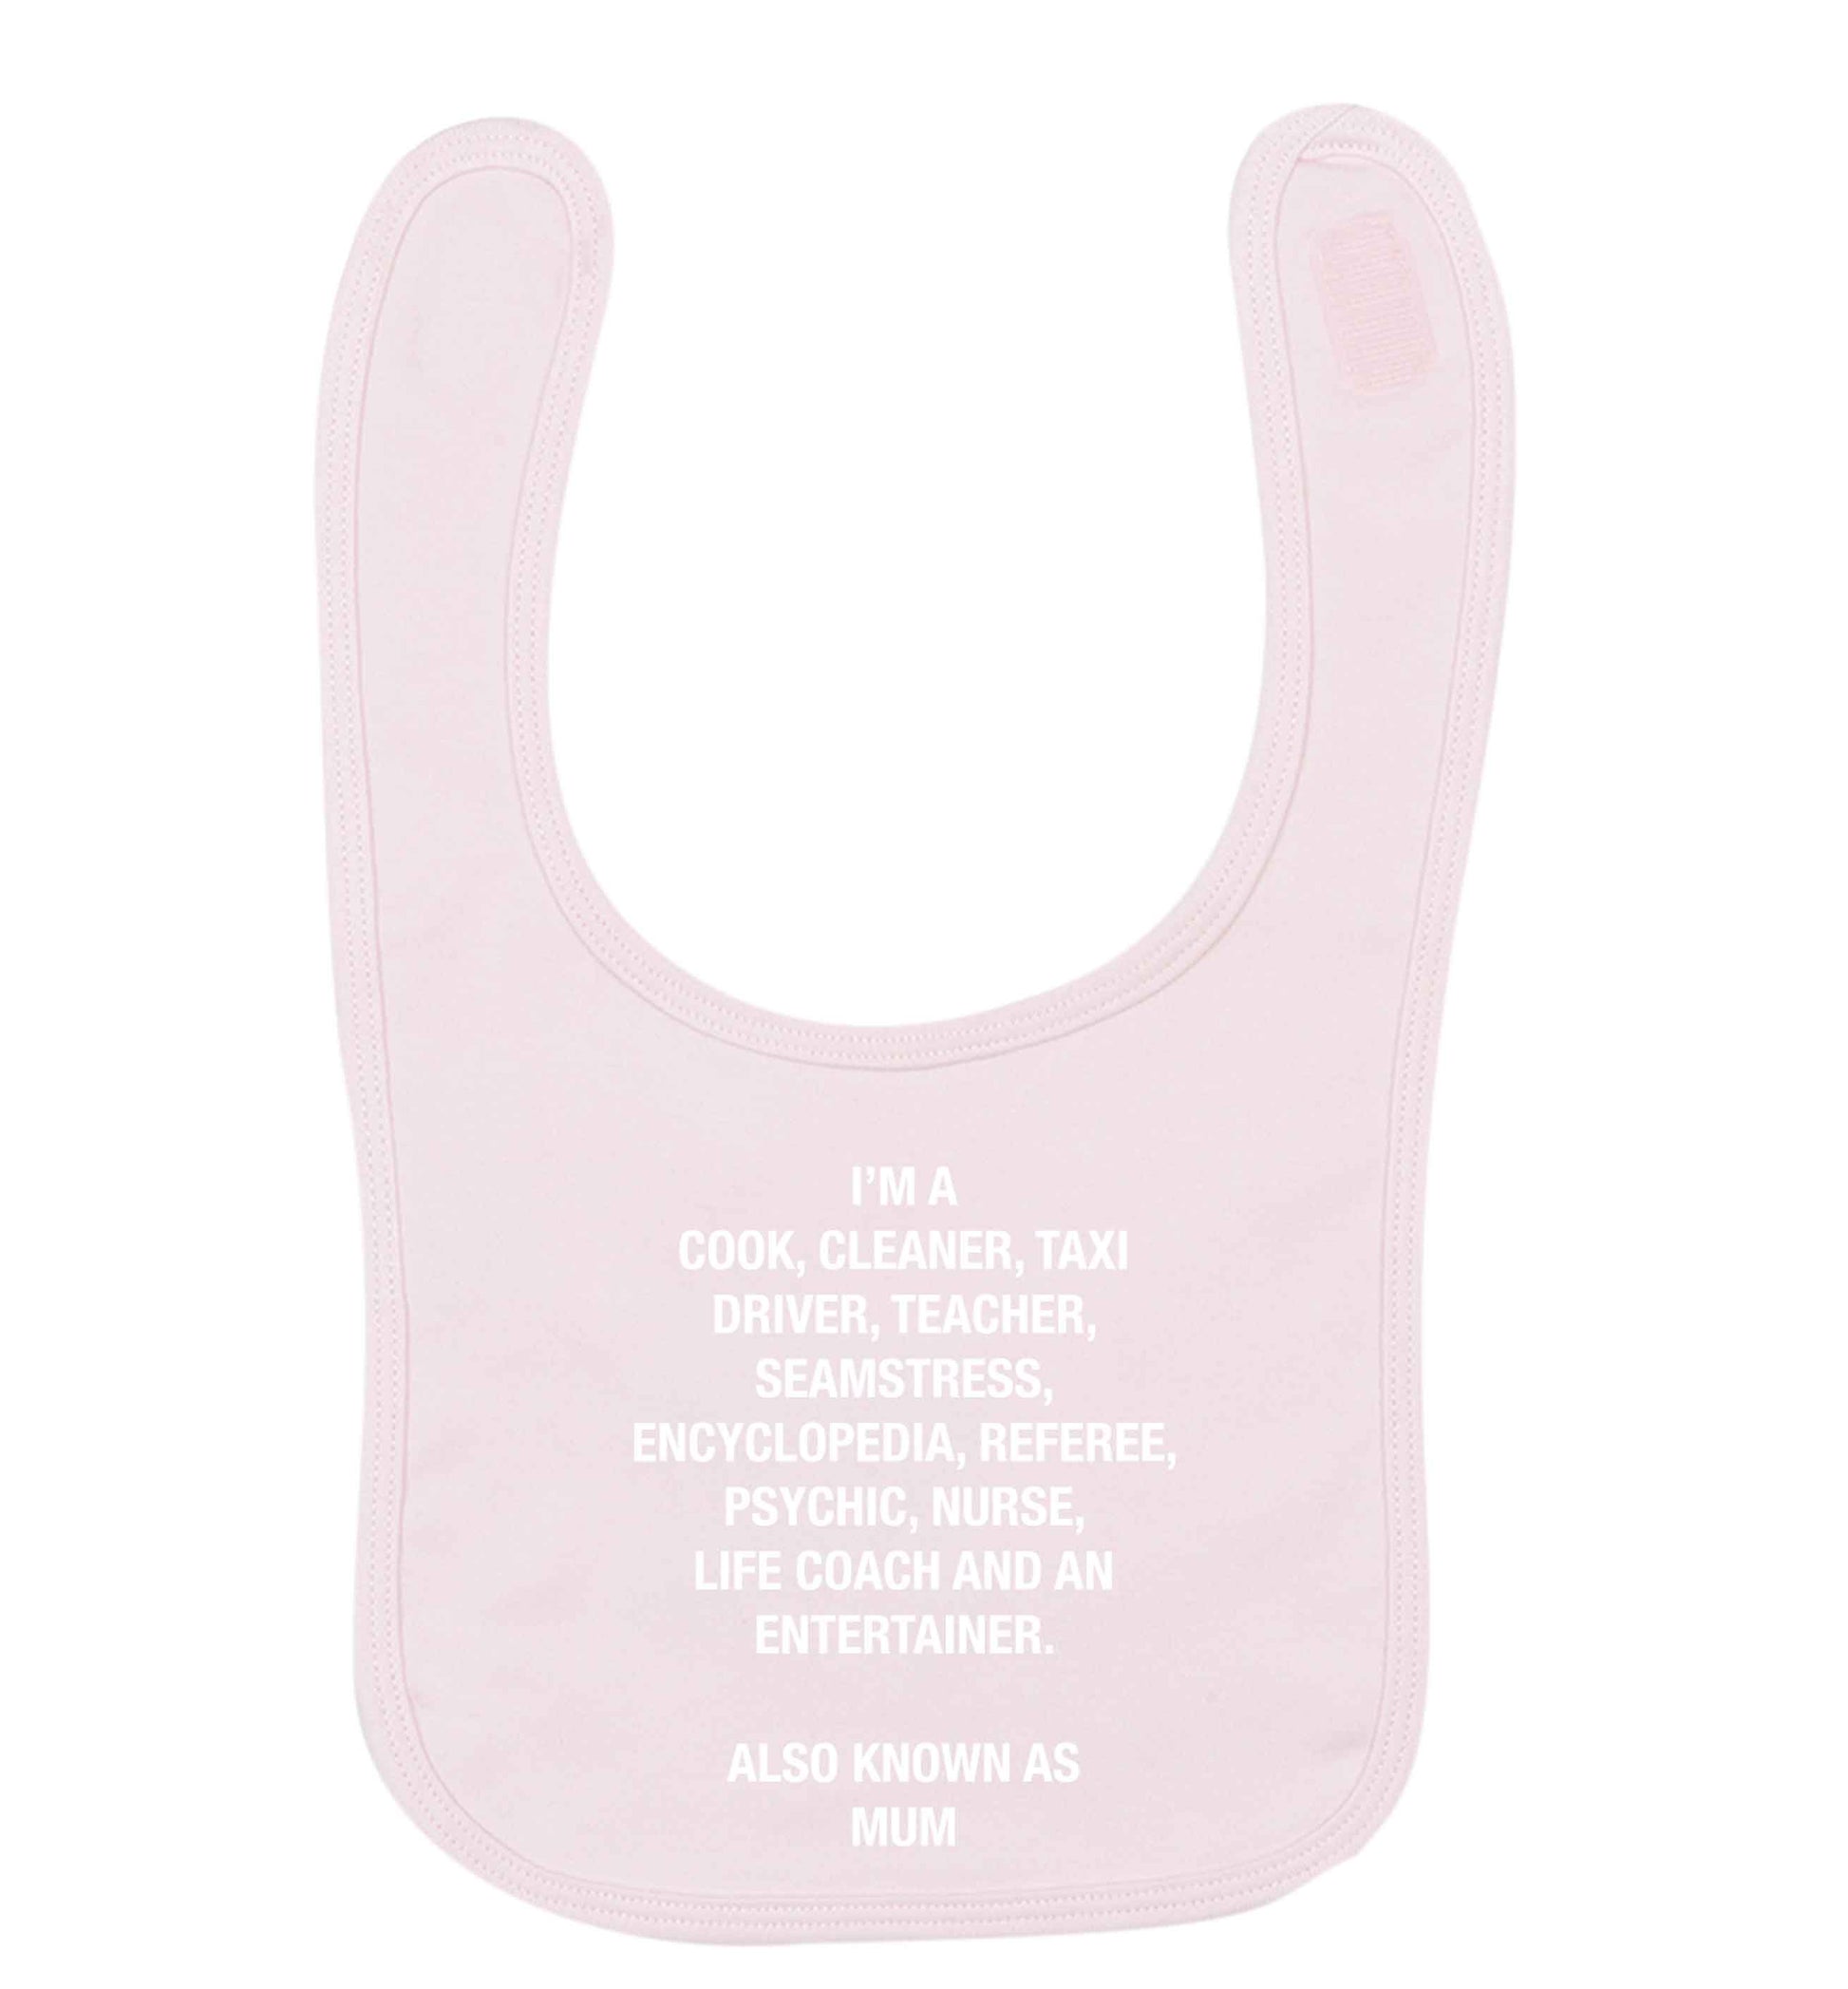 Funny gifts for your mum on mother's dayor her birthday! Mum, cook, cleaner, taxi driver, teacher, seamstress, encyclopedia, referee, psychic, nurse, life coach and entertainer pale pink baby bib